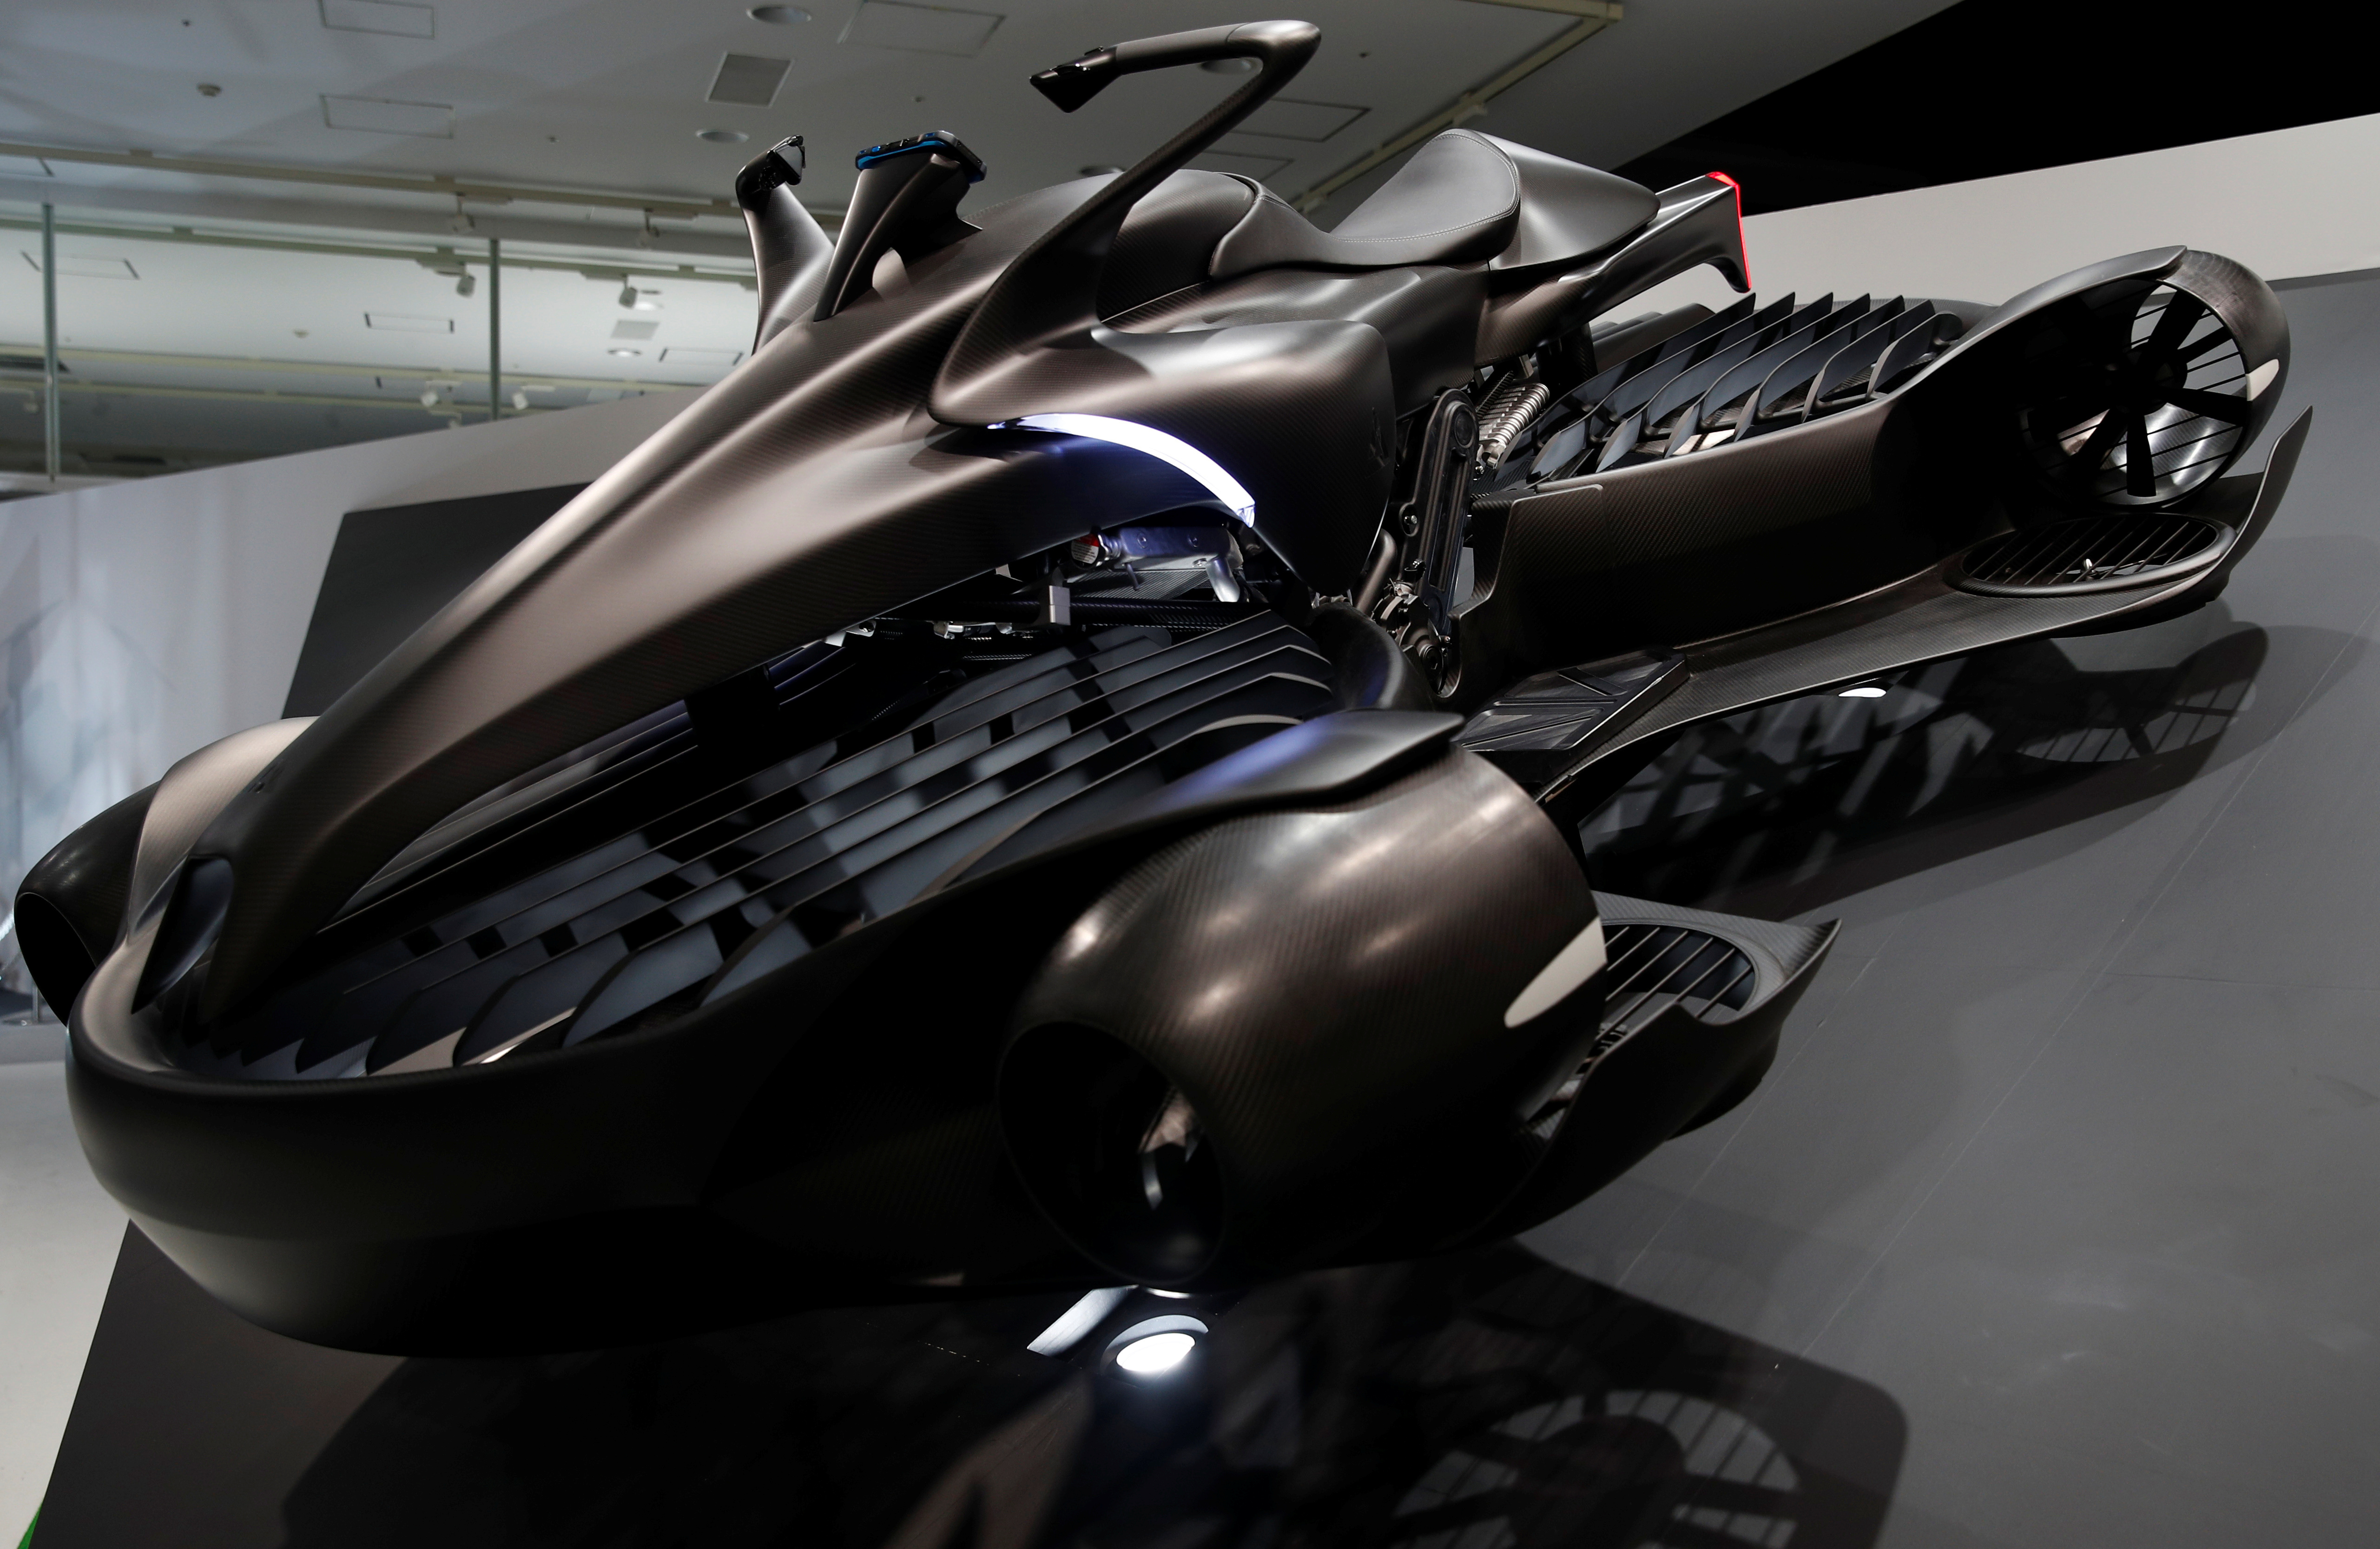 A.L.I technology's Xturismo air-mobility hover bike is displayed at the Tokyo Motor Show, in Tokyo